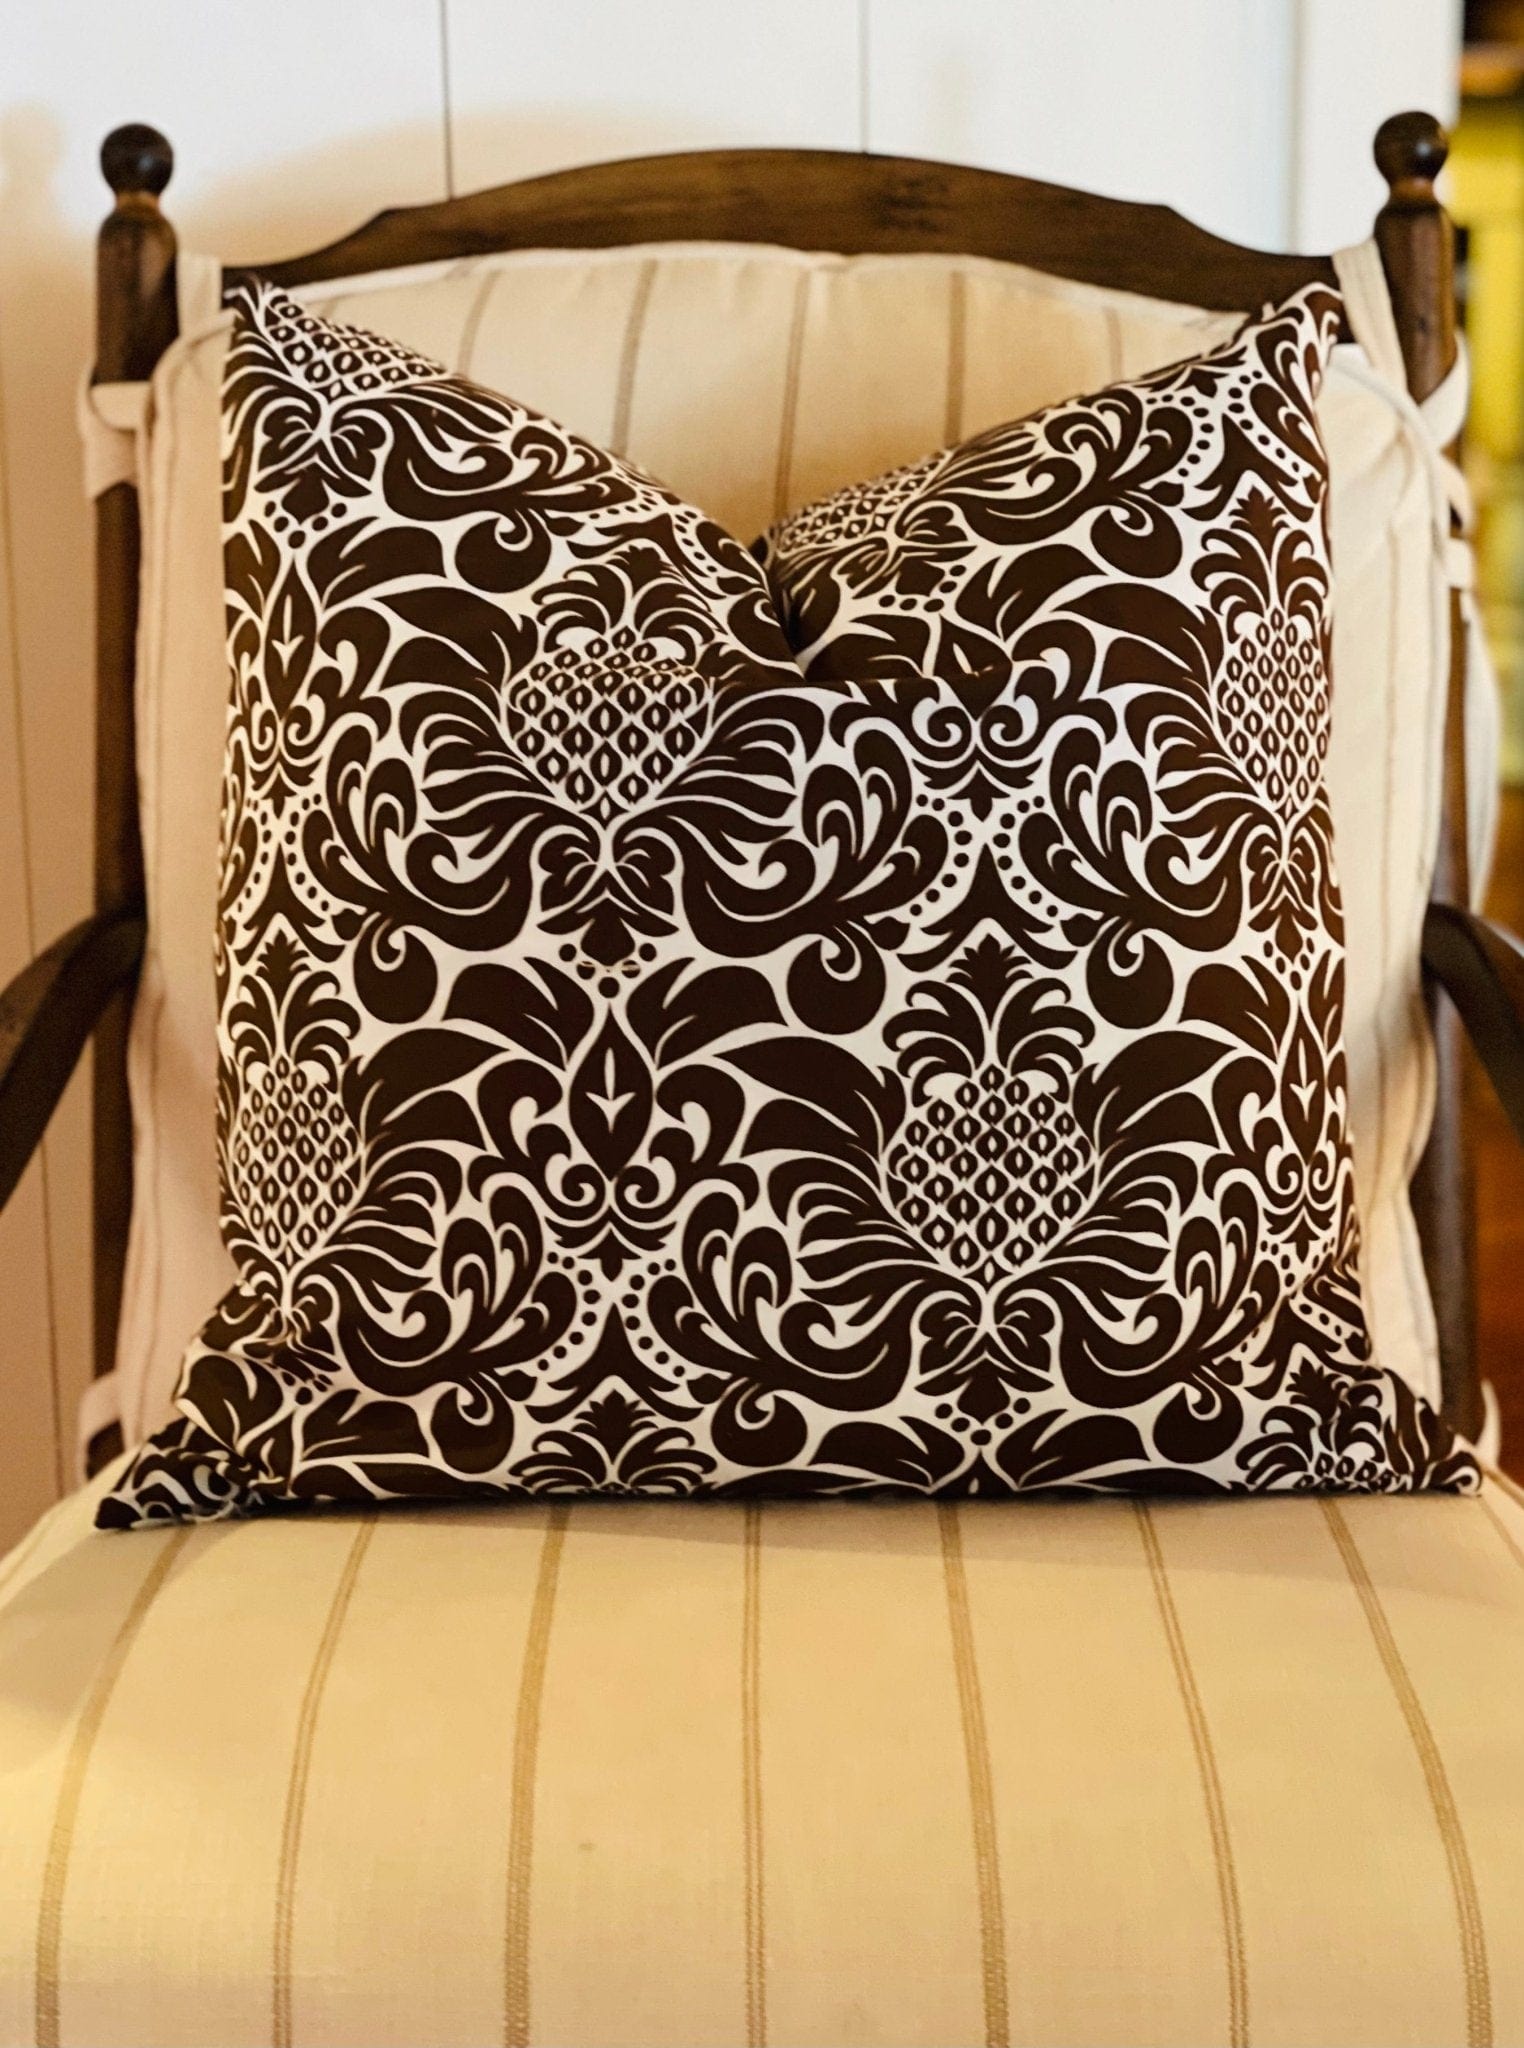 Hen House Linens gracious chocolate brown printed cloth 16" x 16" pillow covers